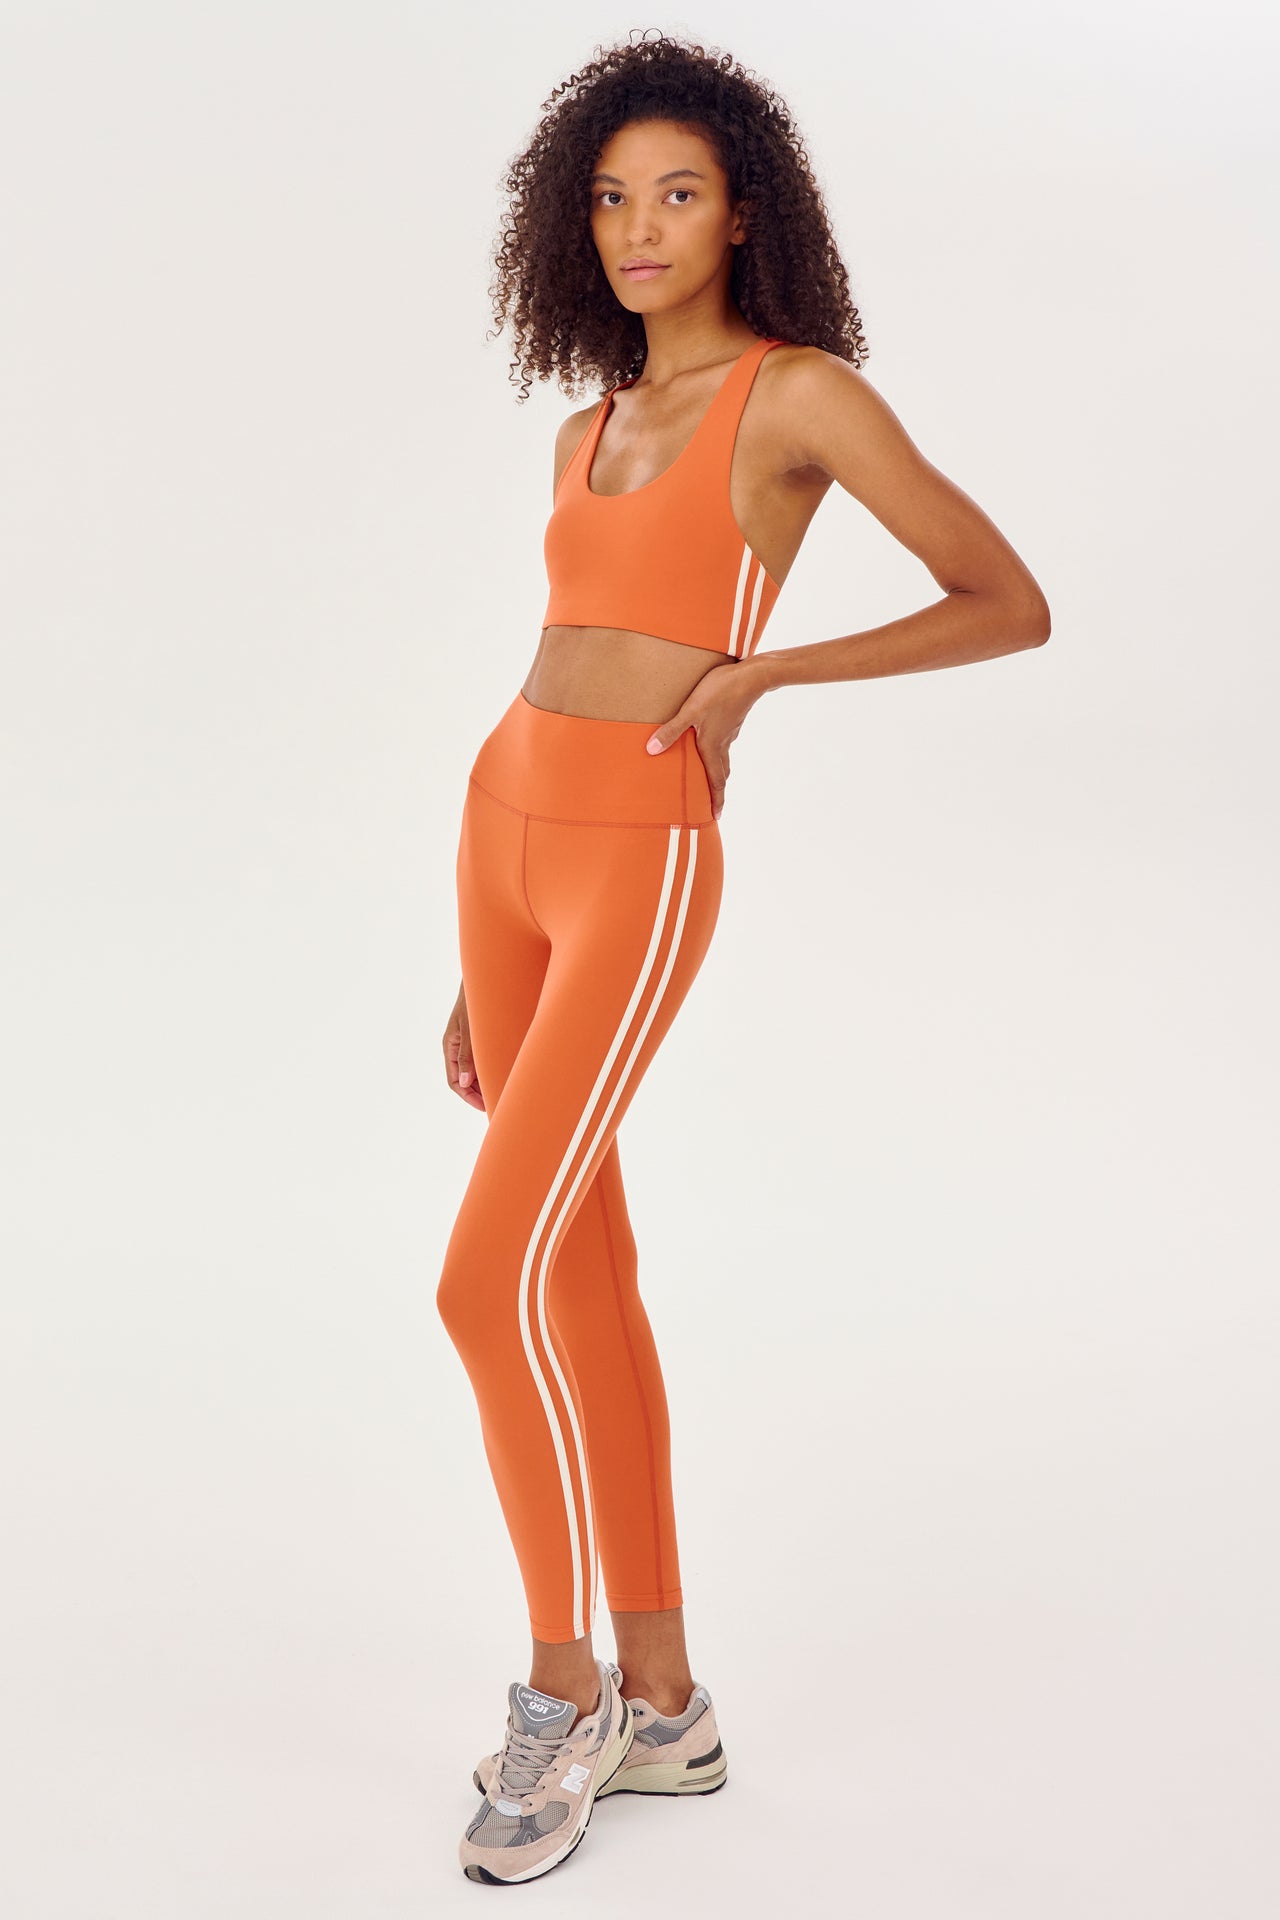 Full side view of girl wearing orange leggings with two thin white stripes down the side and a orange sports bra with white shoes